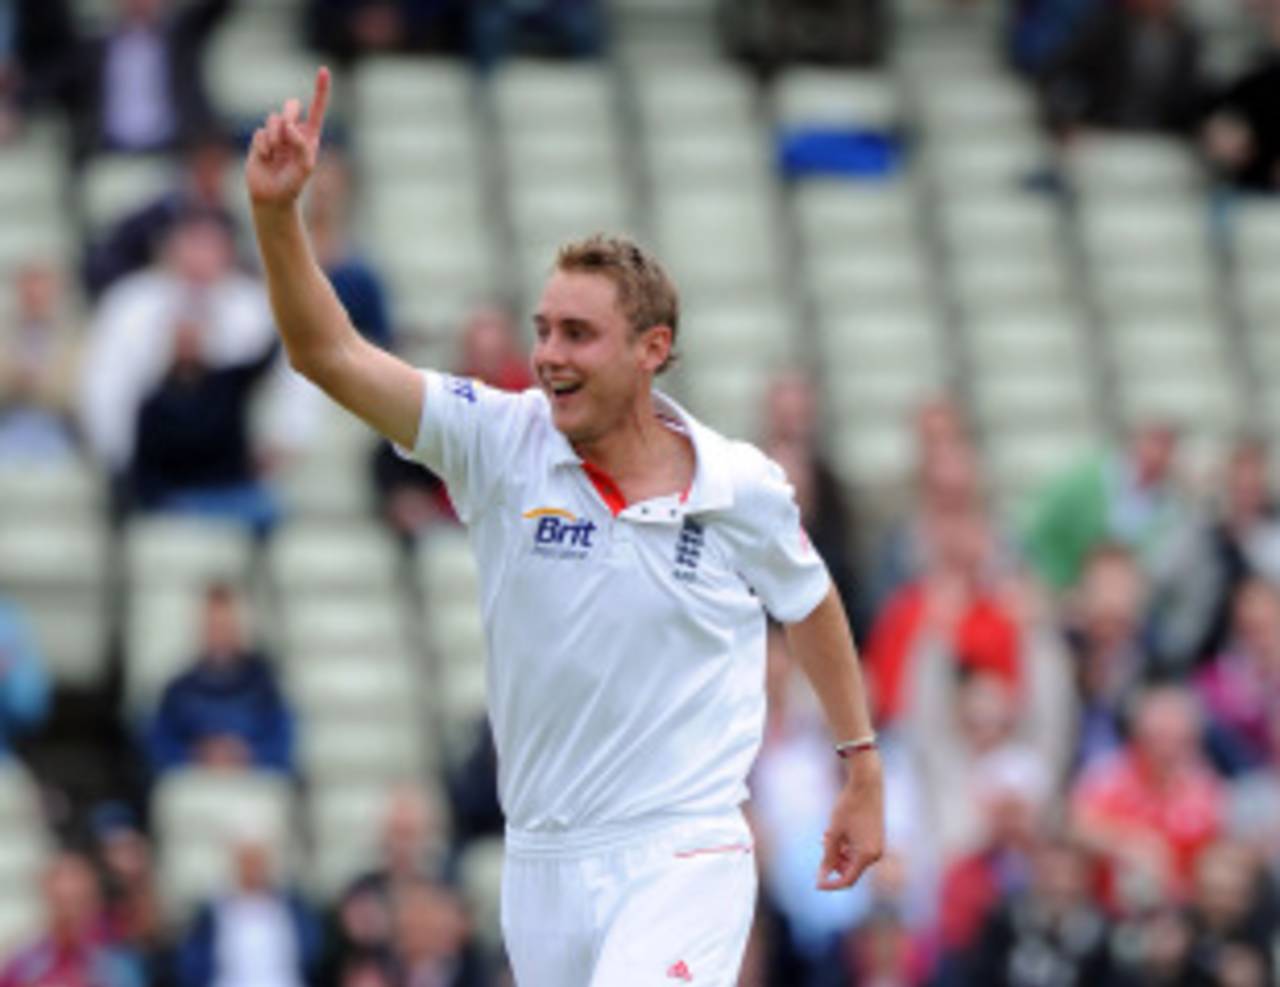 Stuart Broad celebrates as the England bowlers enjoyed another productive outing against a hapless Pakistan line-up, England v Pakistan, 2nd Test, Edgbaston, August 6, 2010